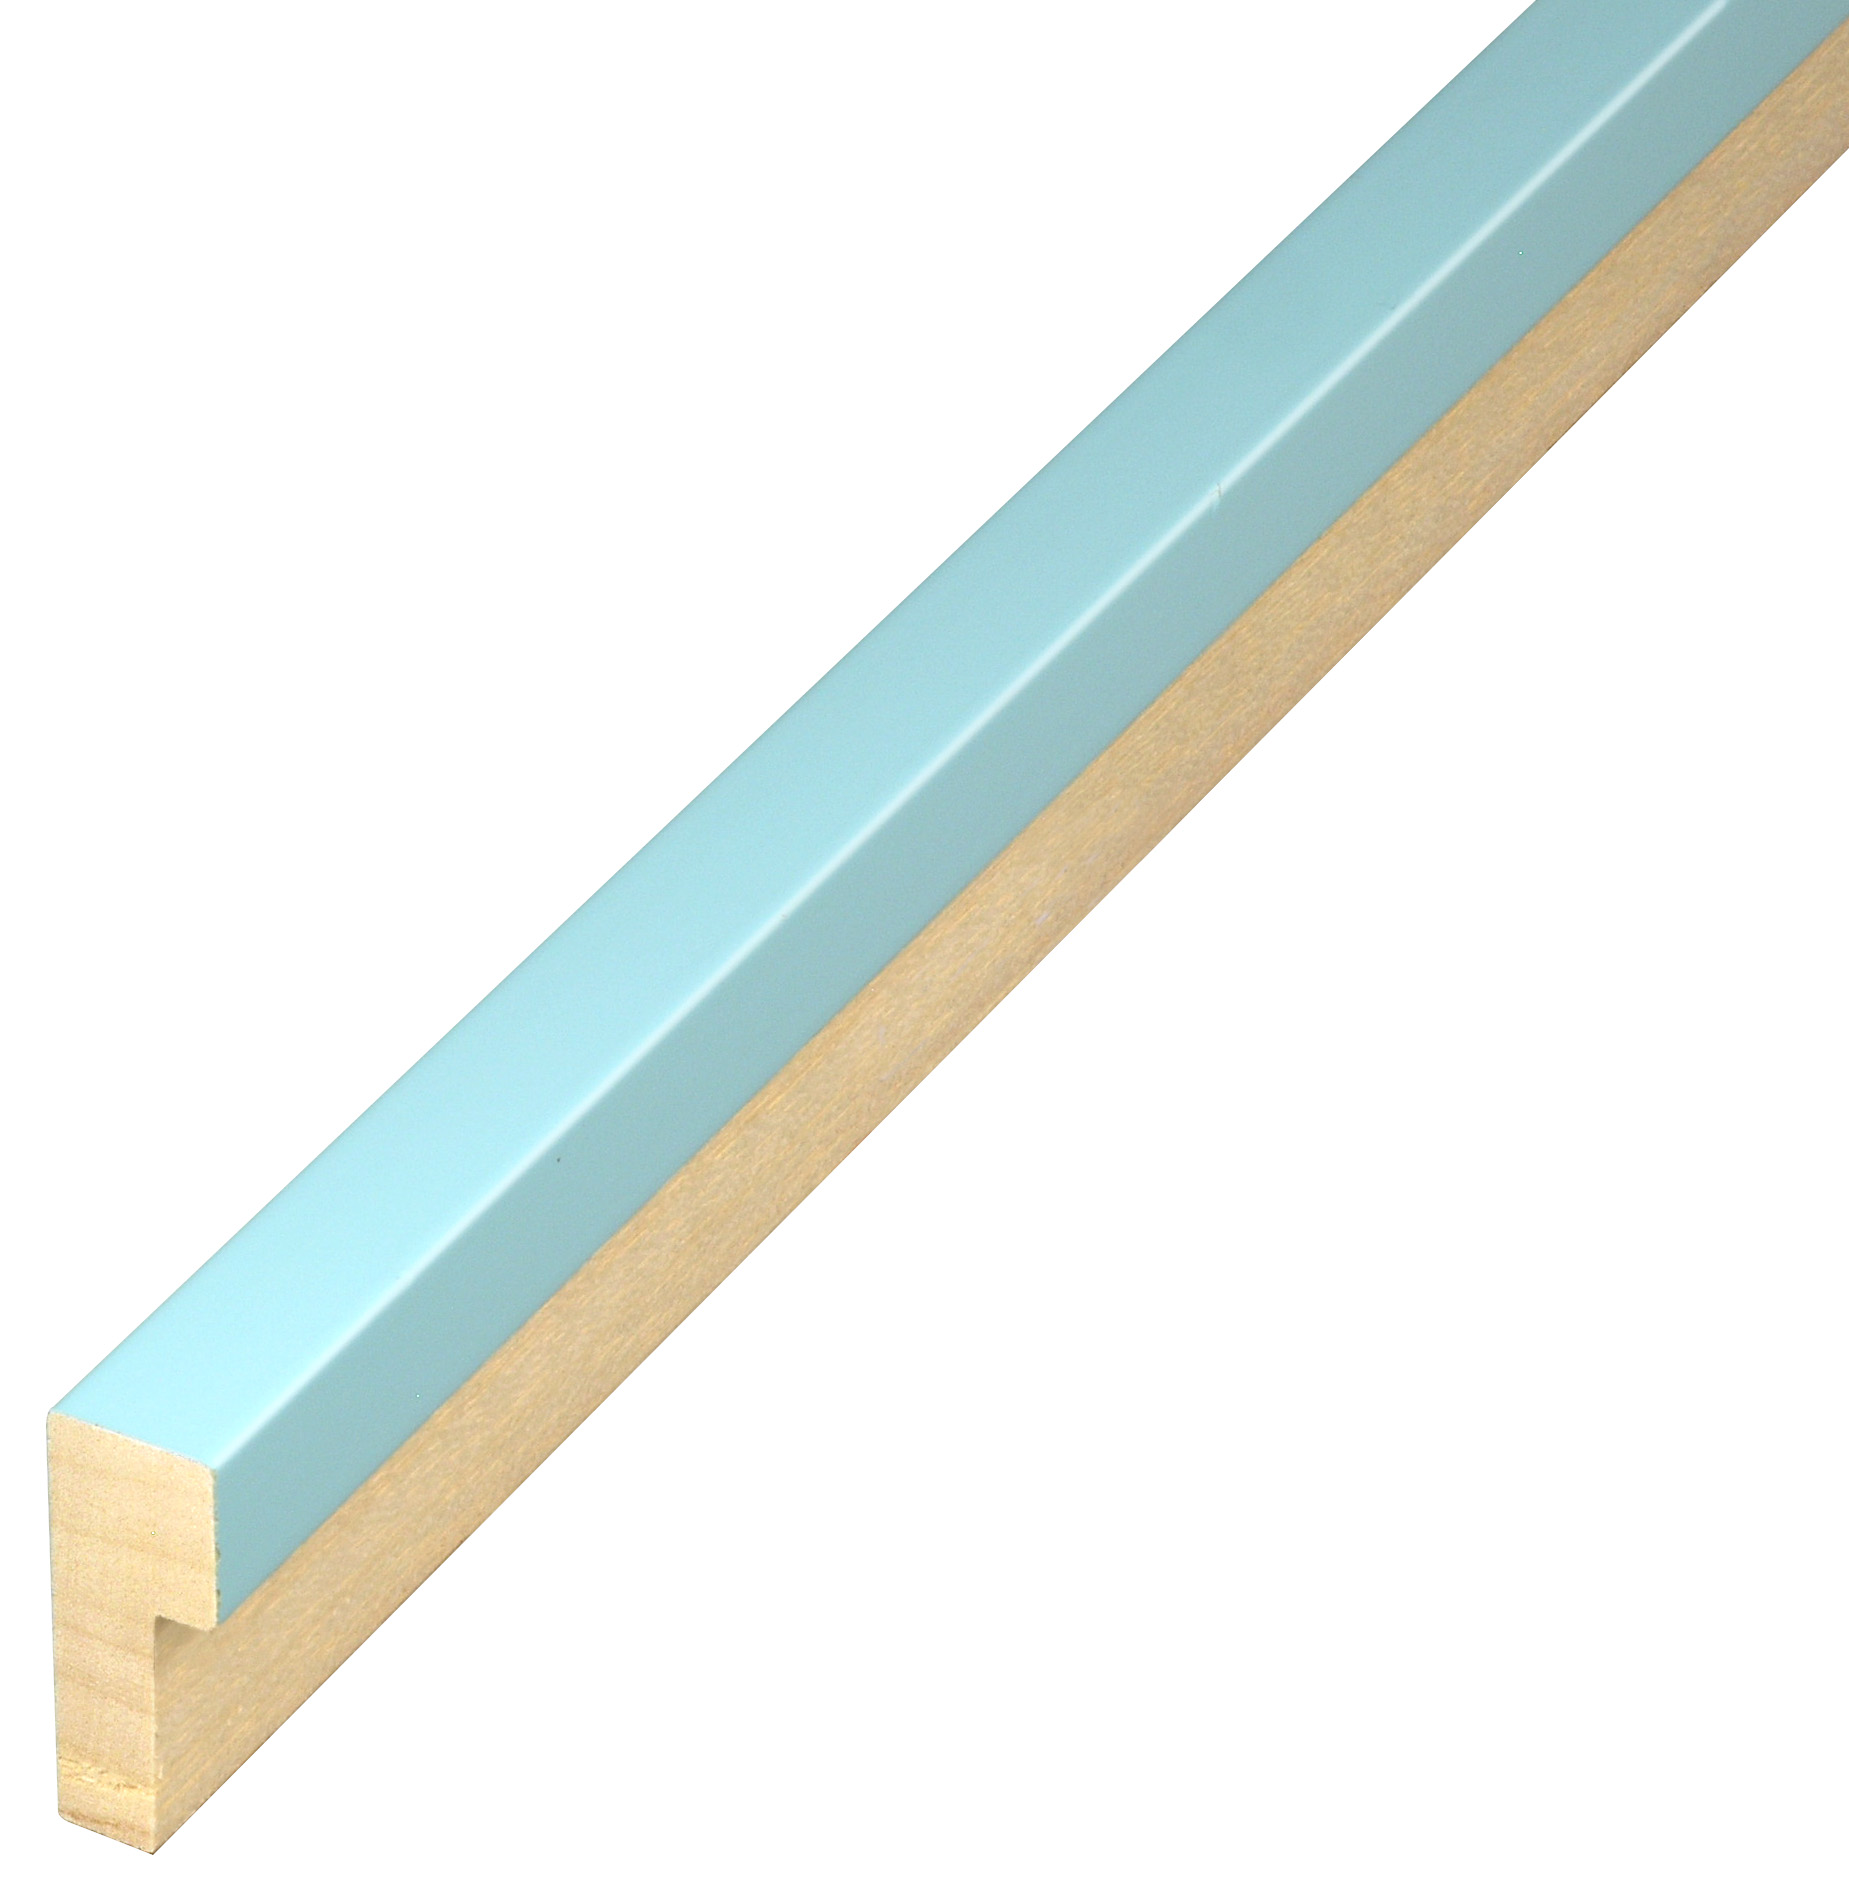 Moulding ayous - Widht 15 mm - Height 40 mm - Sky blue